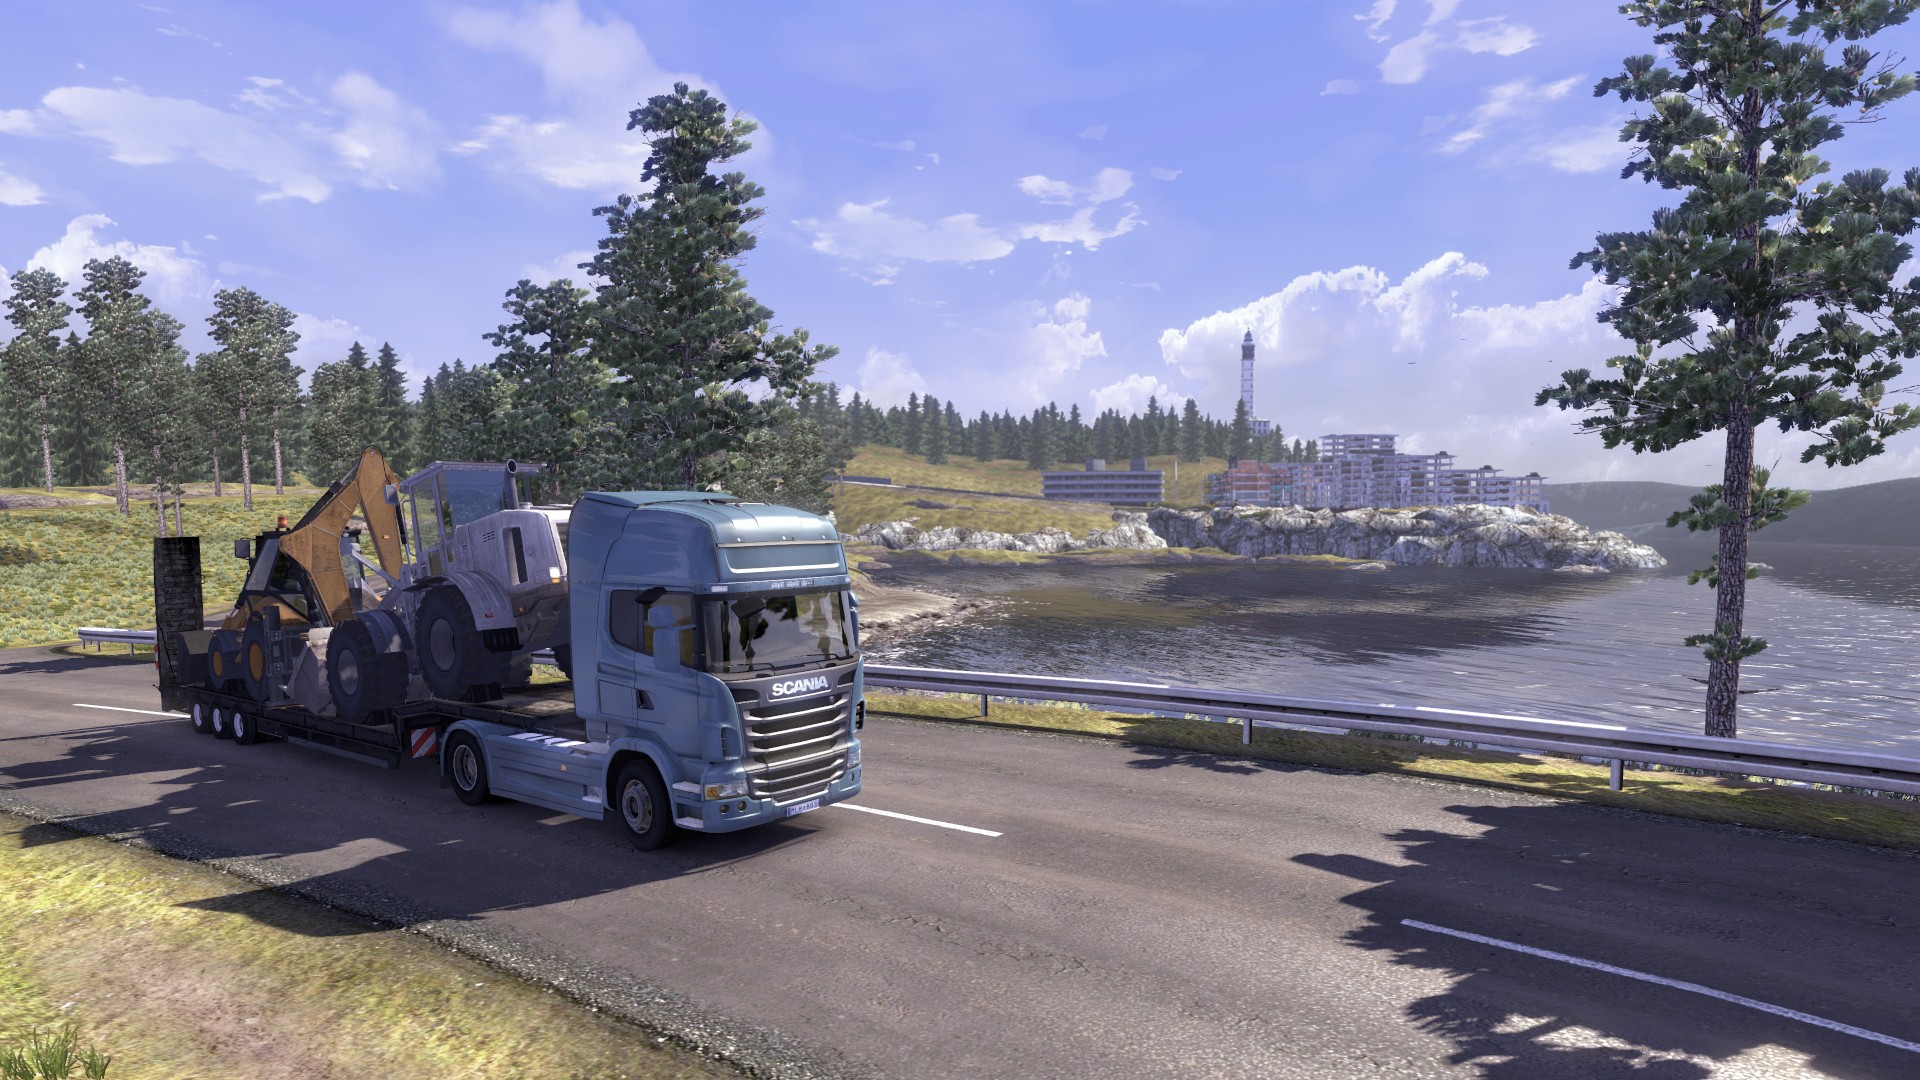 download scania truck driving simulator latest version for free